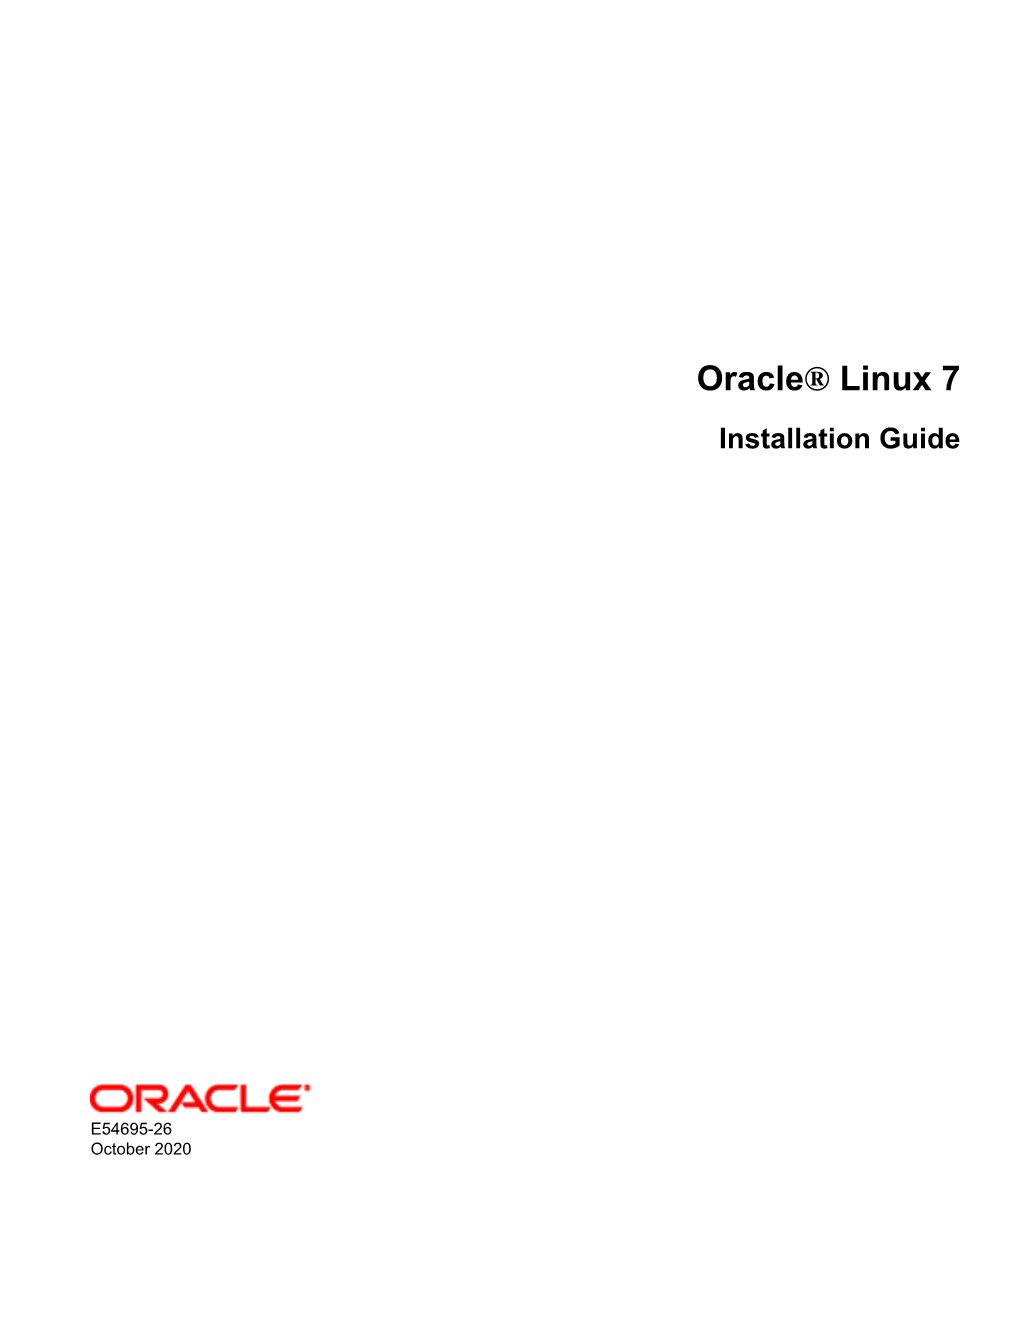 Oracle® Linux 7 Installation Guide